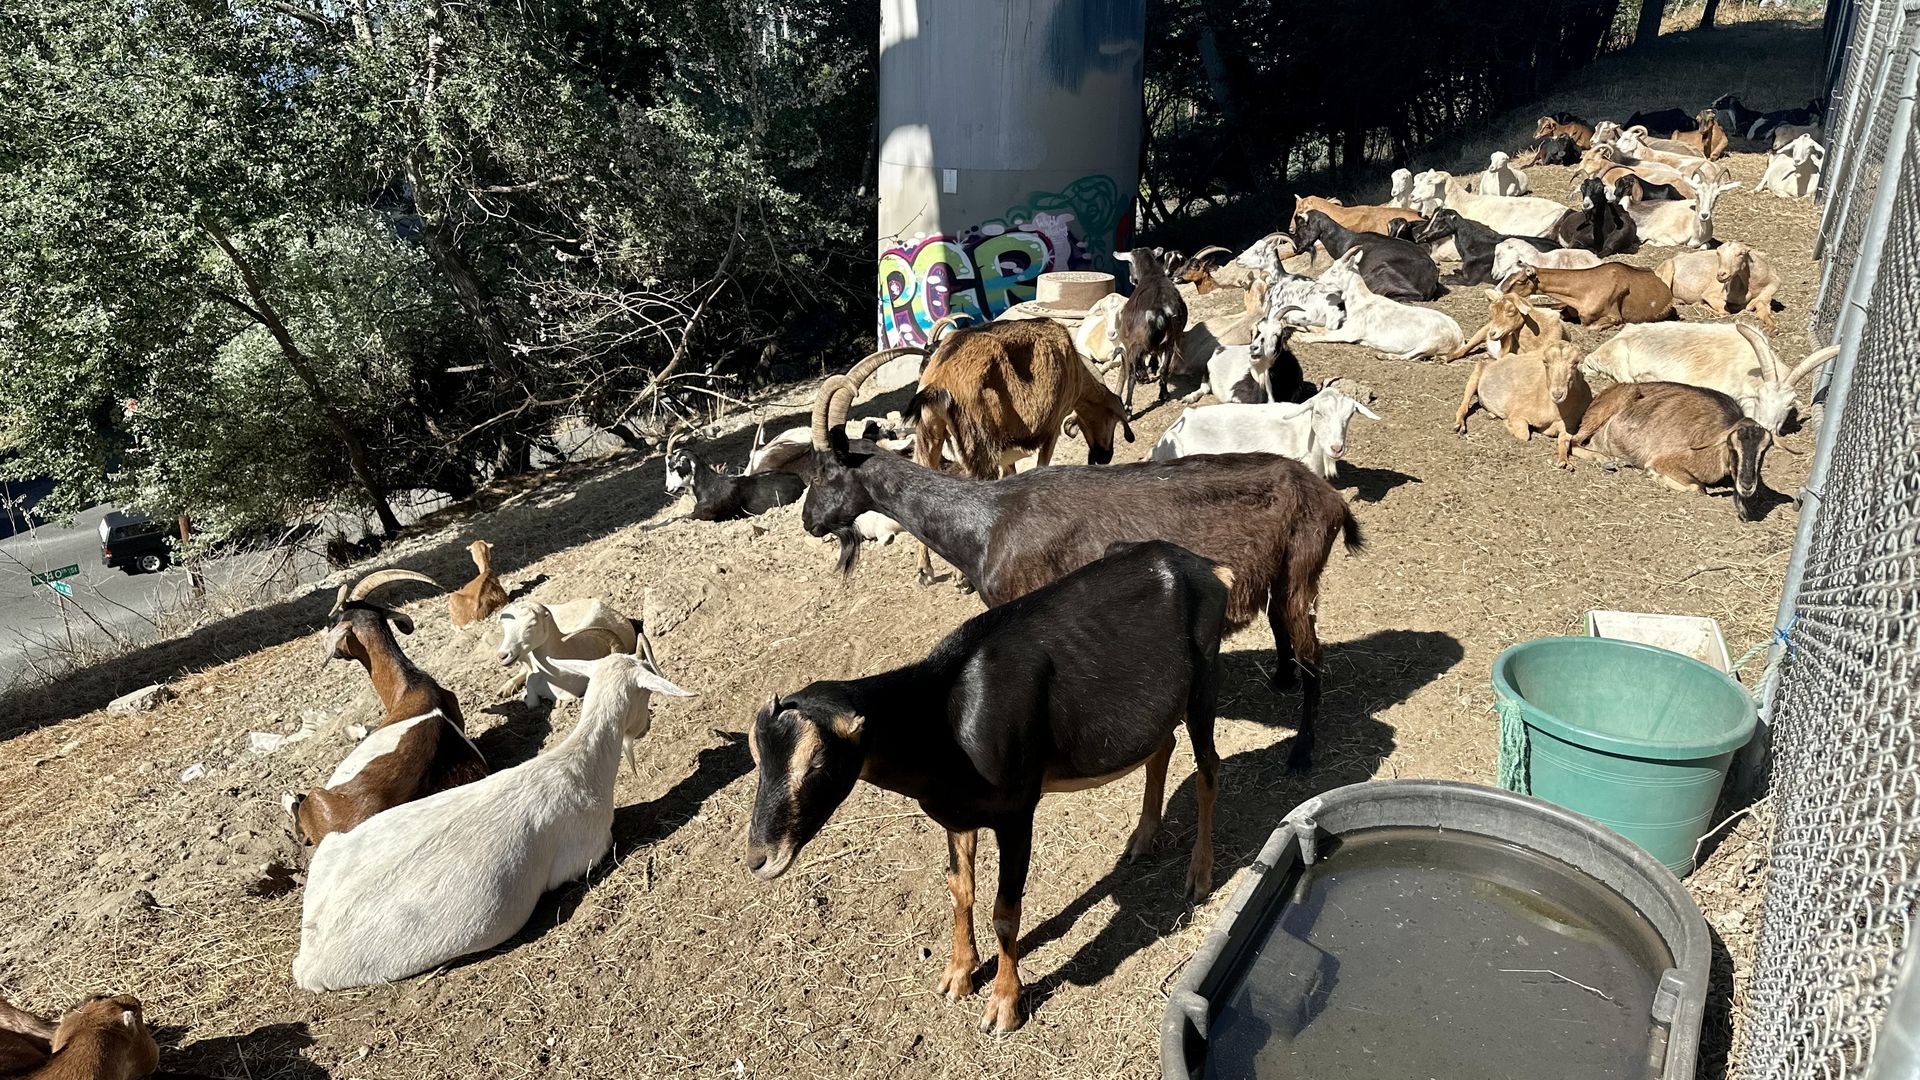 A herd of goats on the top of a hill next to a chain link fence, with some on their feet and others lying on the ground.